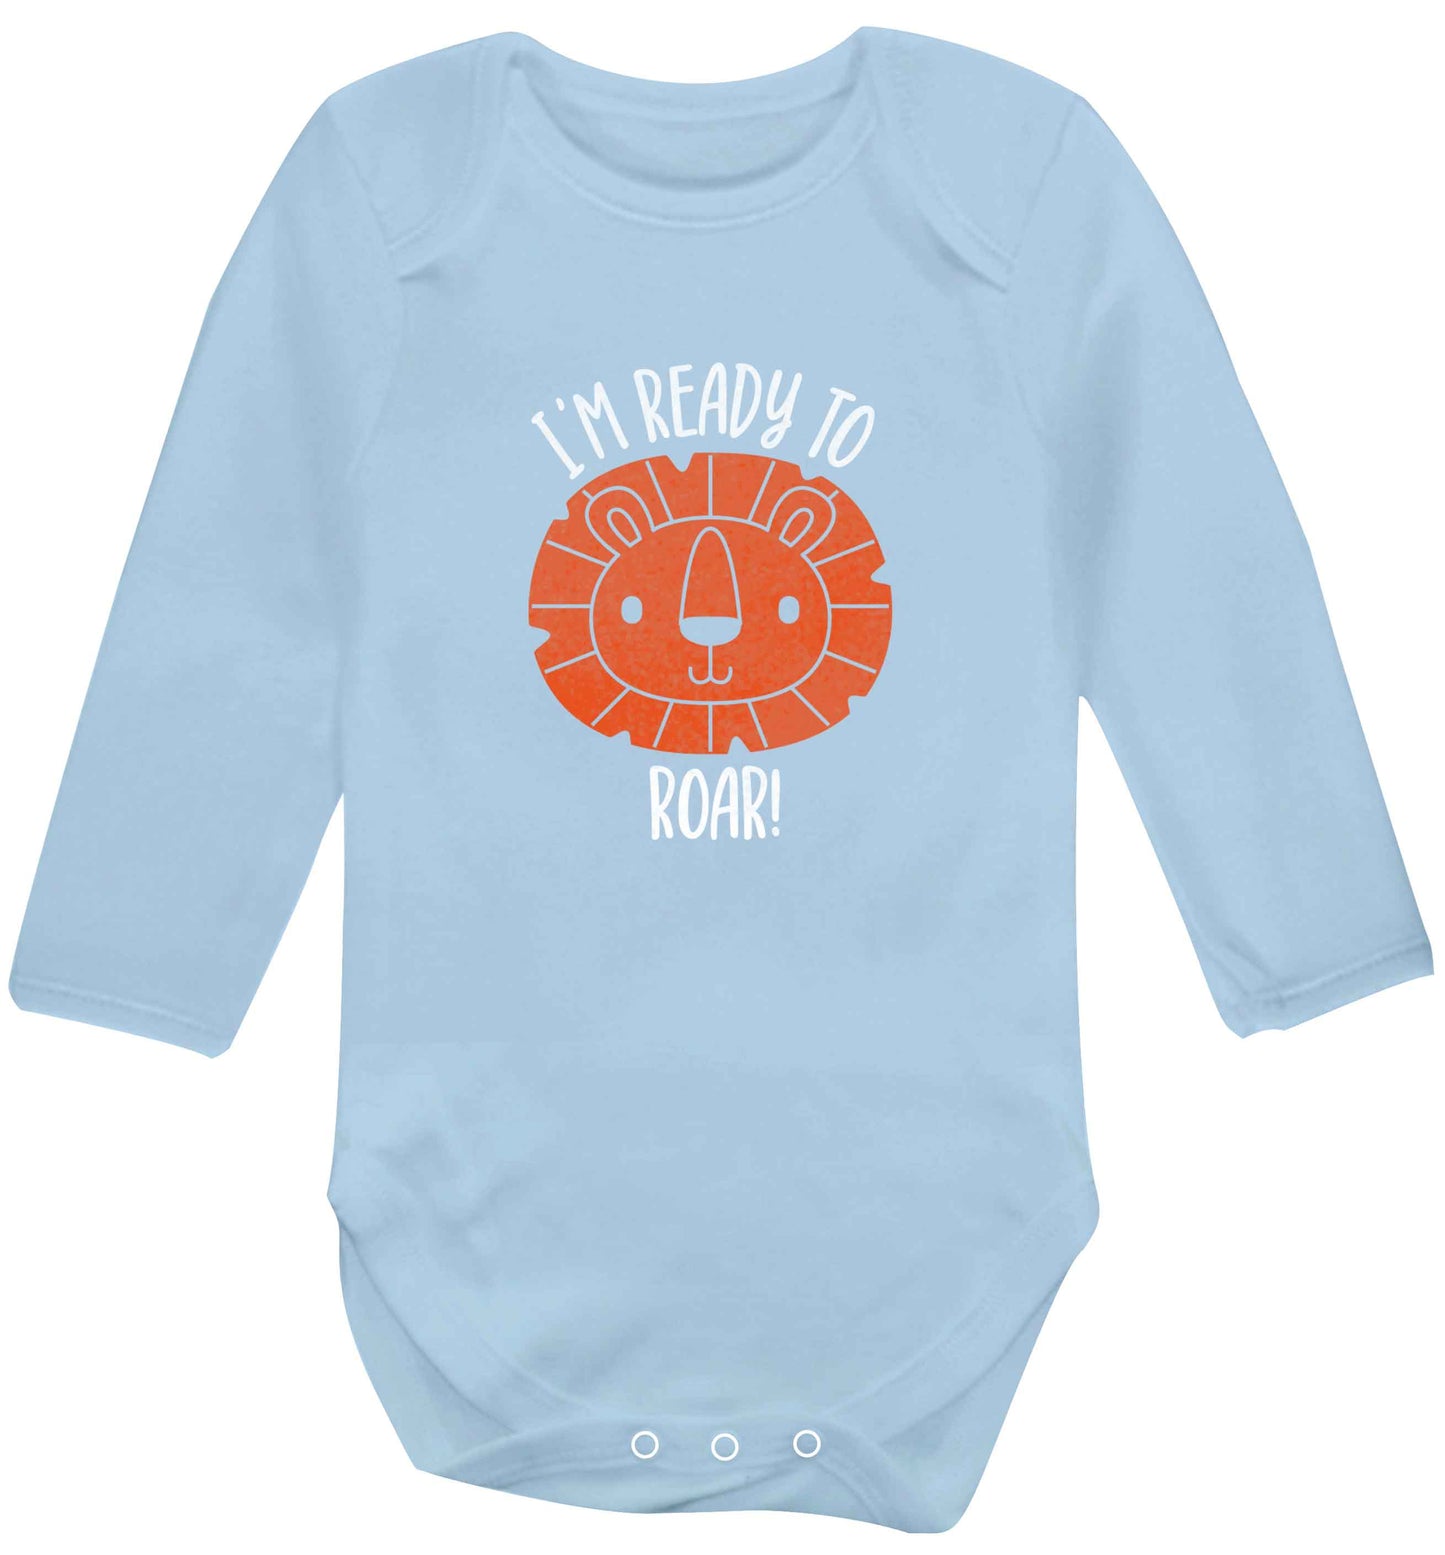 I'm ready to rawr baby vest long sleeved pale blue 6-12 months